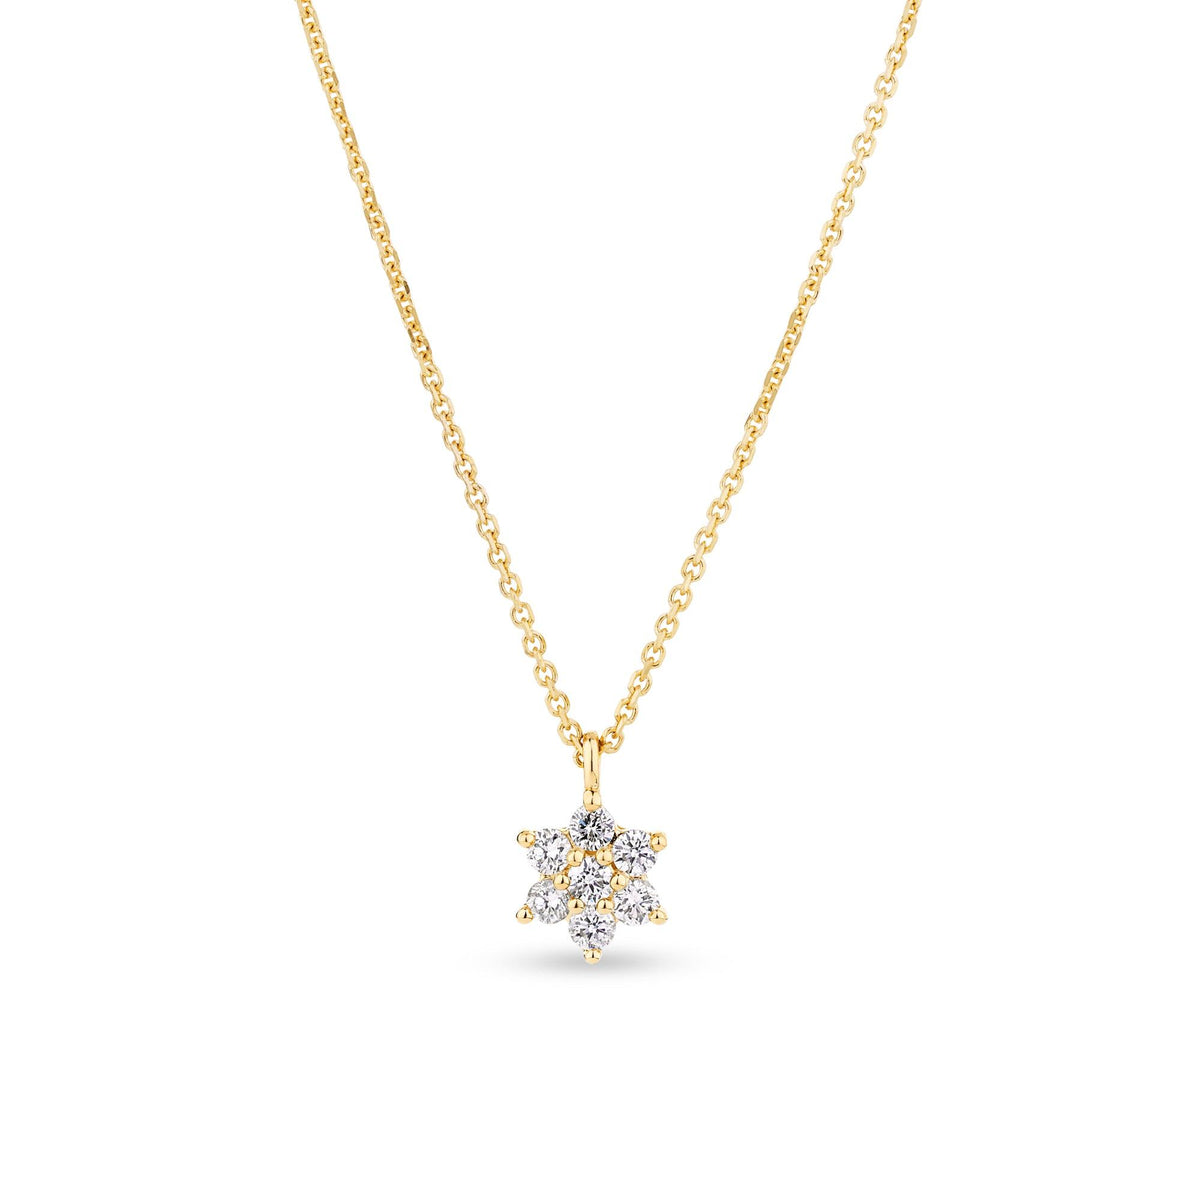 0.16ct TW Diamond Petite Flower Necklace in 9ct Yellow Gold - Wallace Bishop